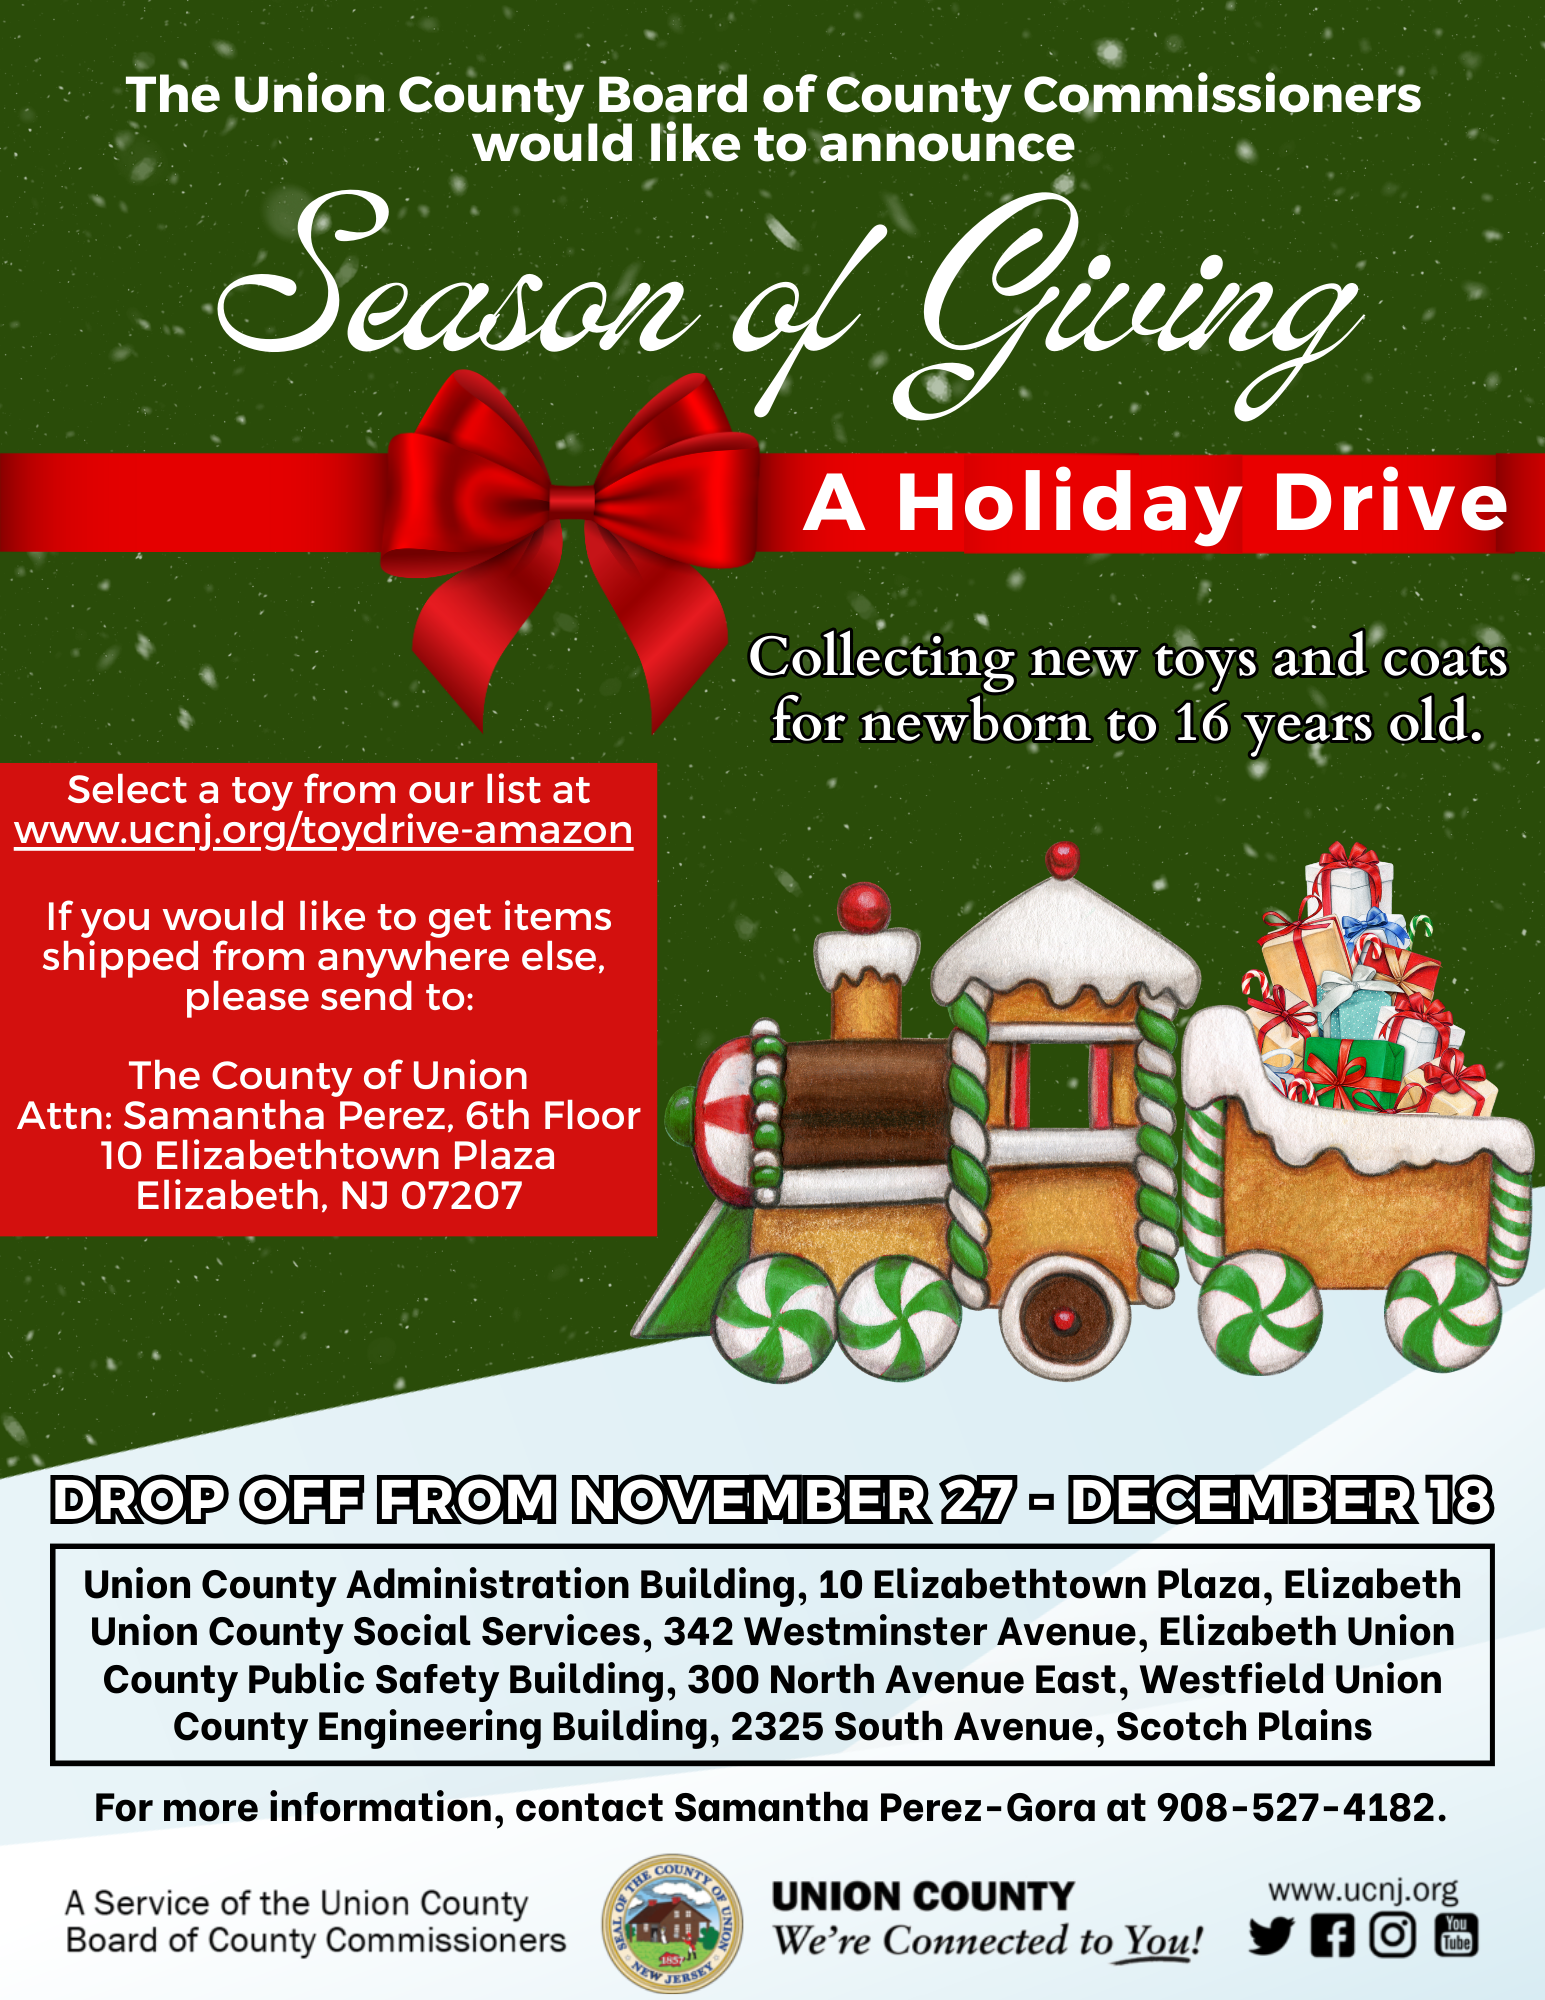 Union County Announces Season of Giving: A Holiday Drive to Brighten the Holidays for Families in Need